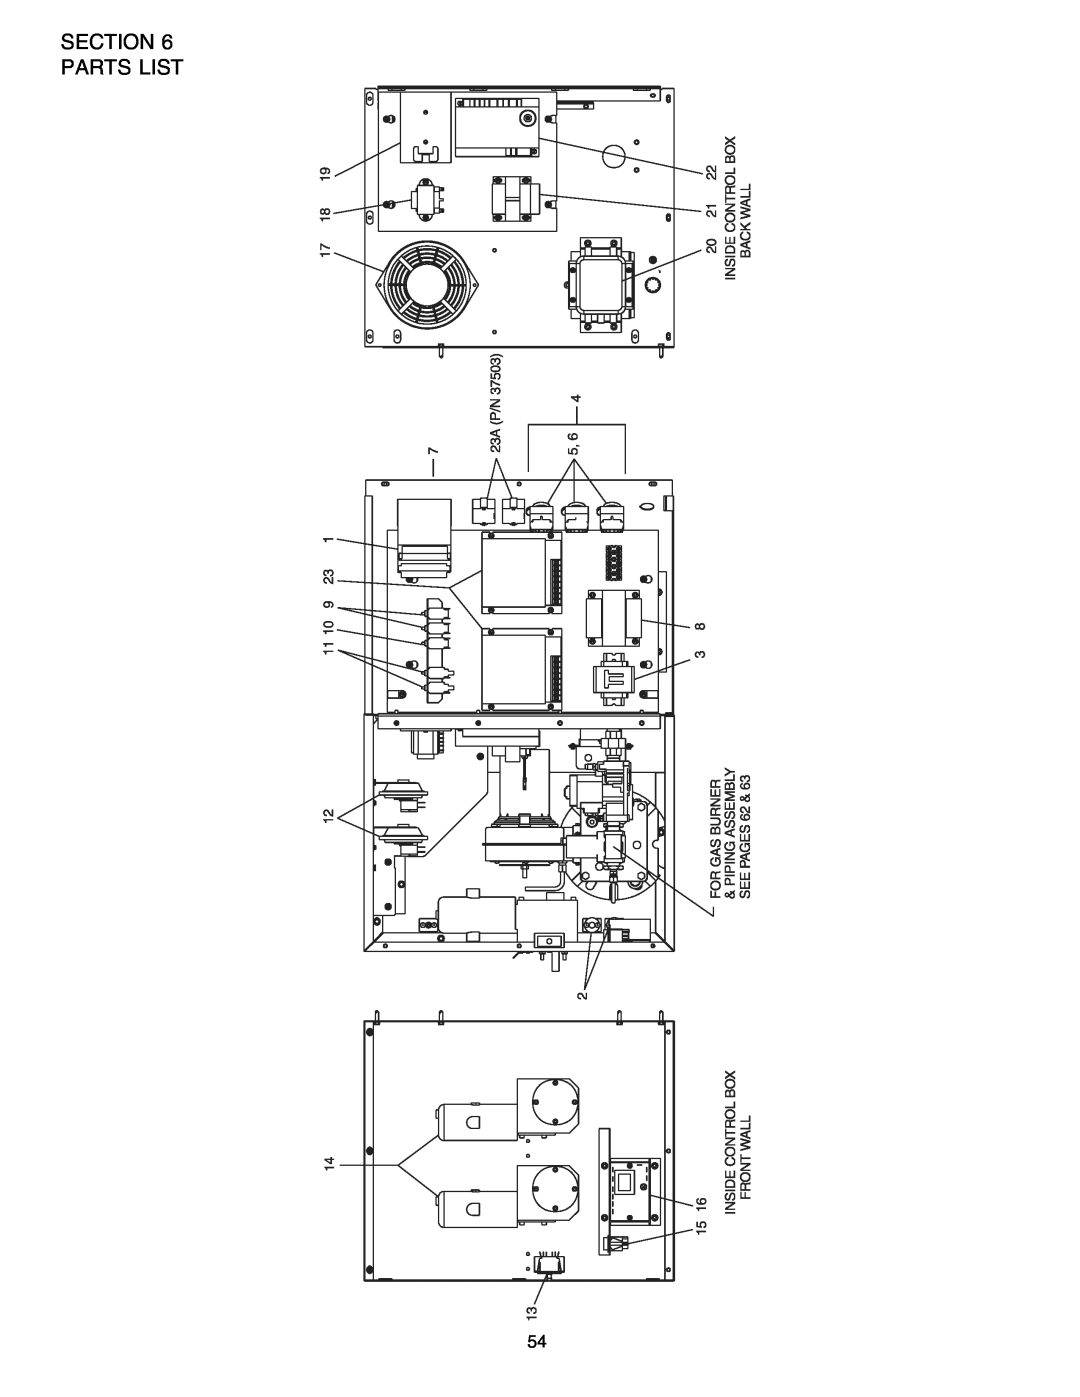 Middleby Marshall PS540 installation manual English, Parts List 